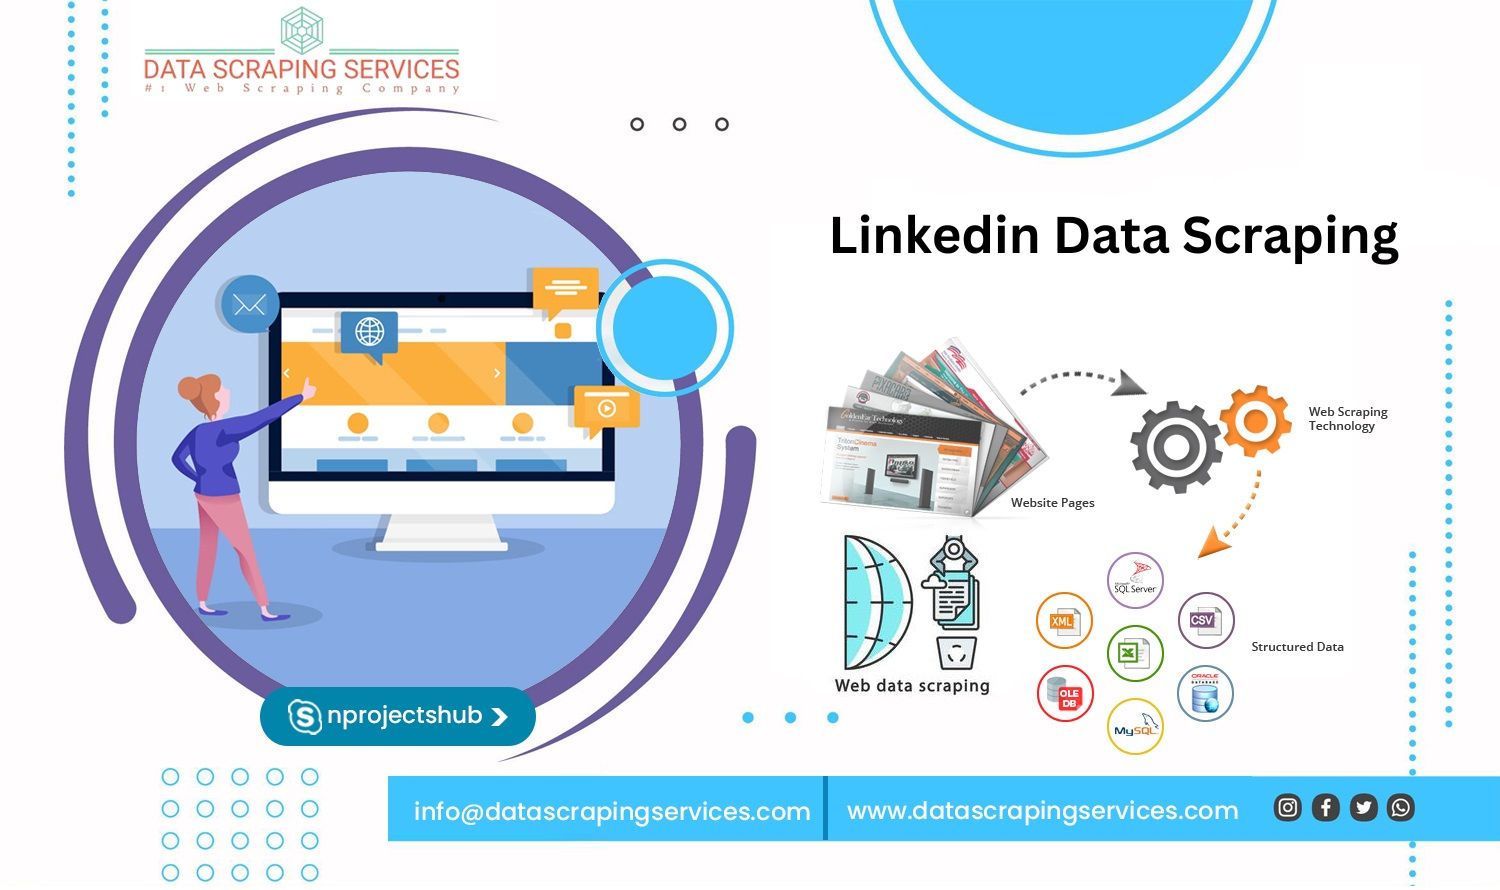 Linkedin Data Scraping Services